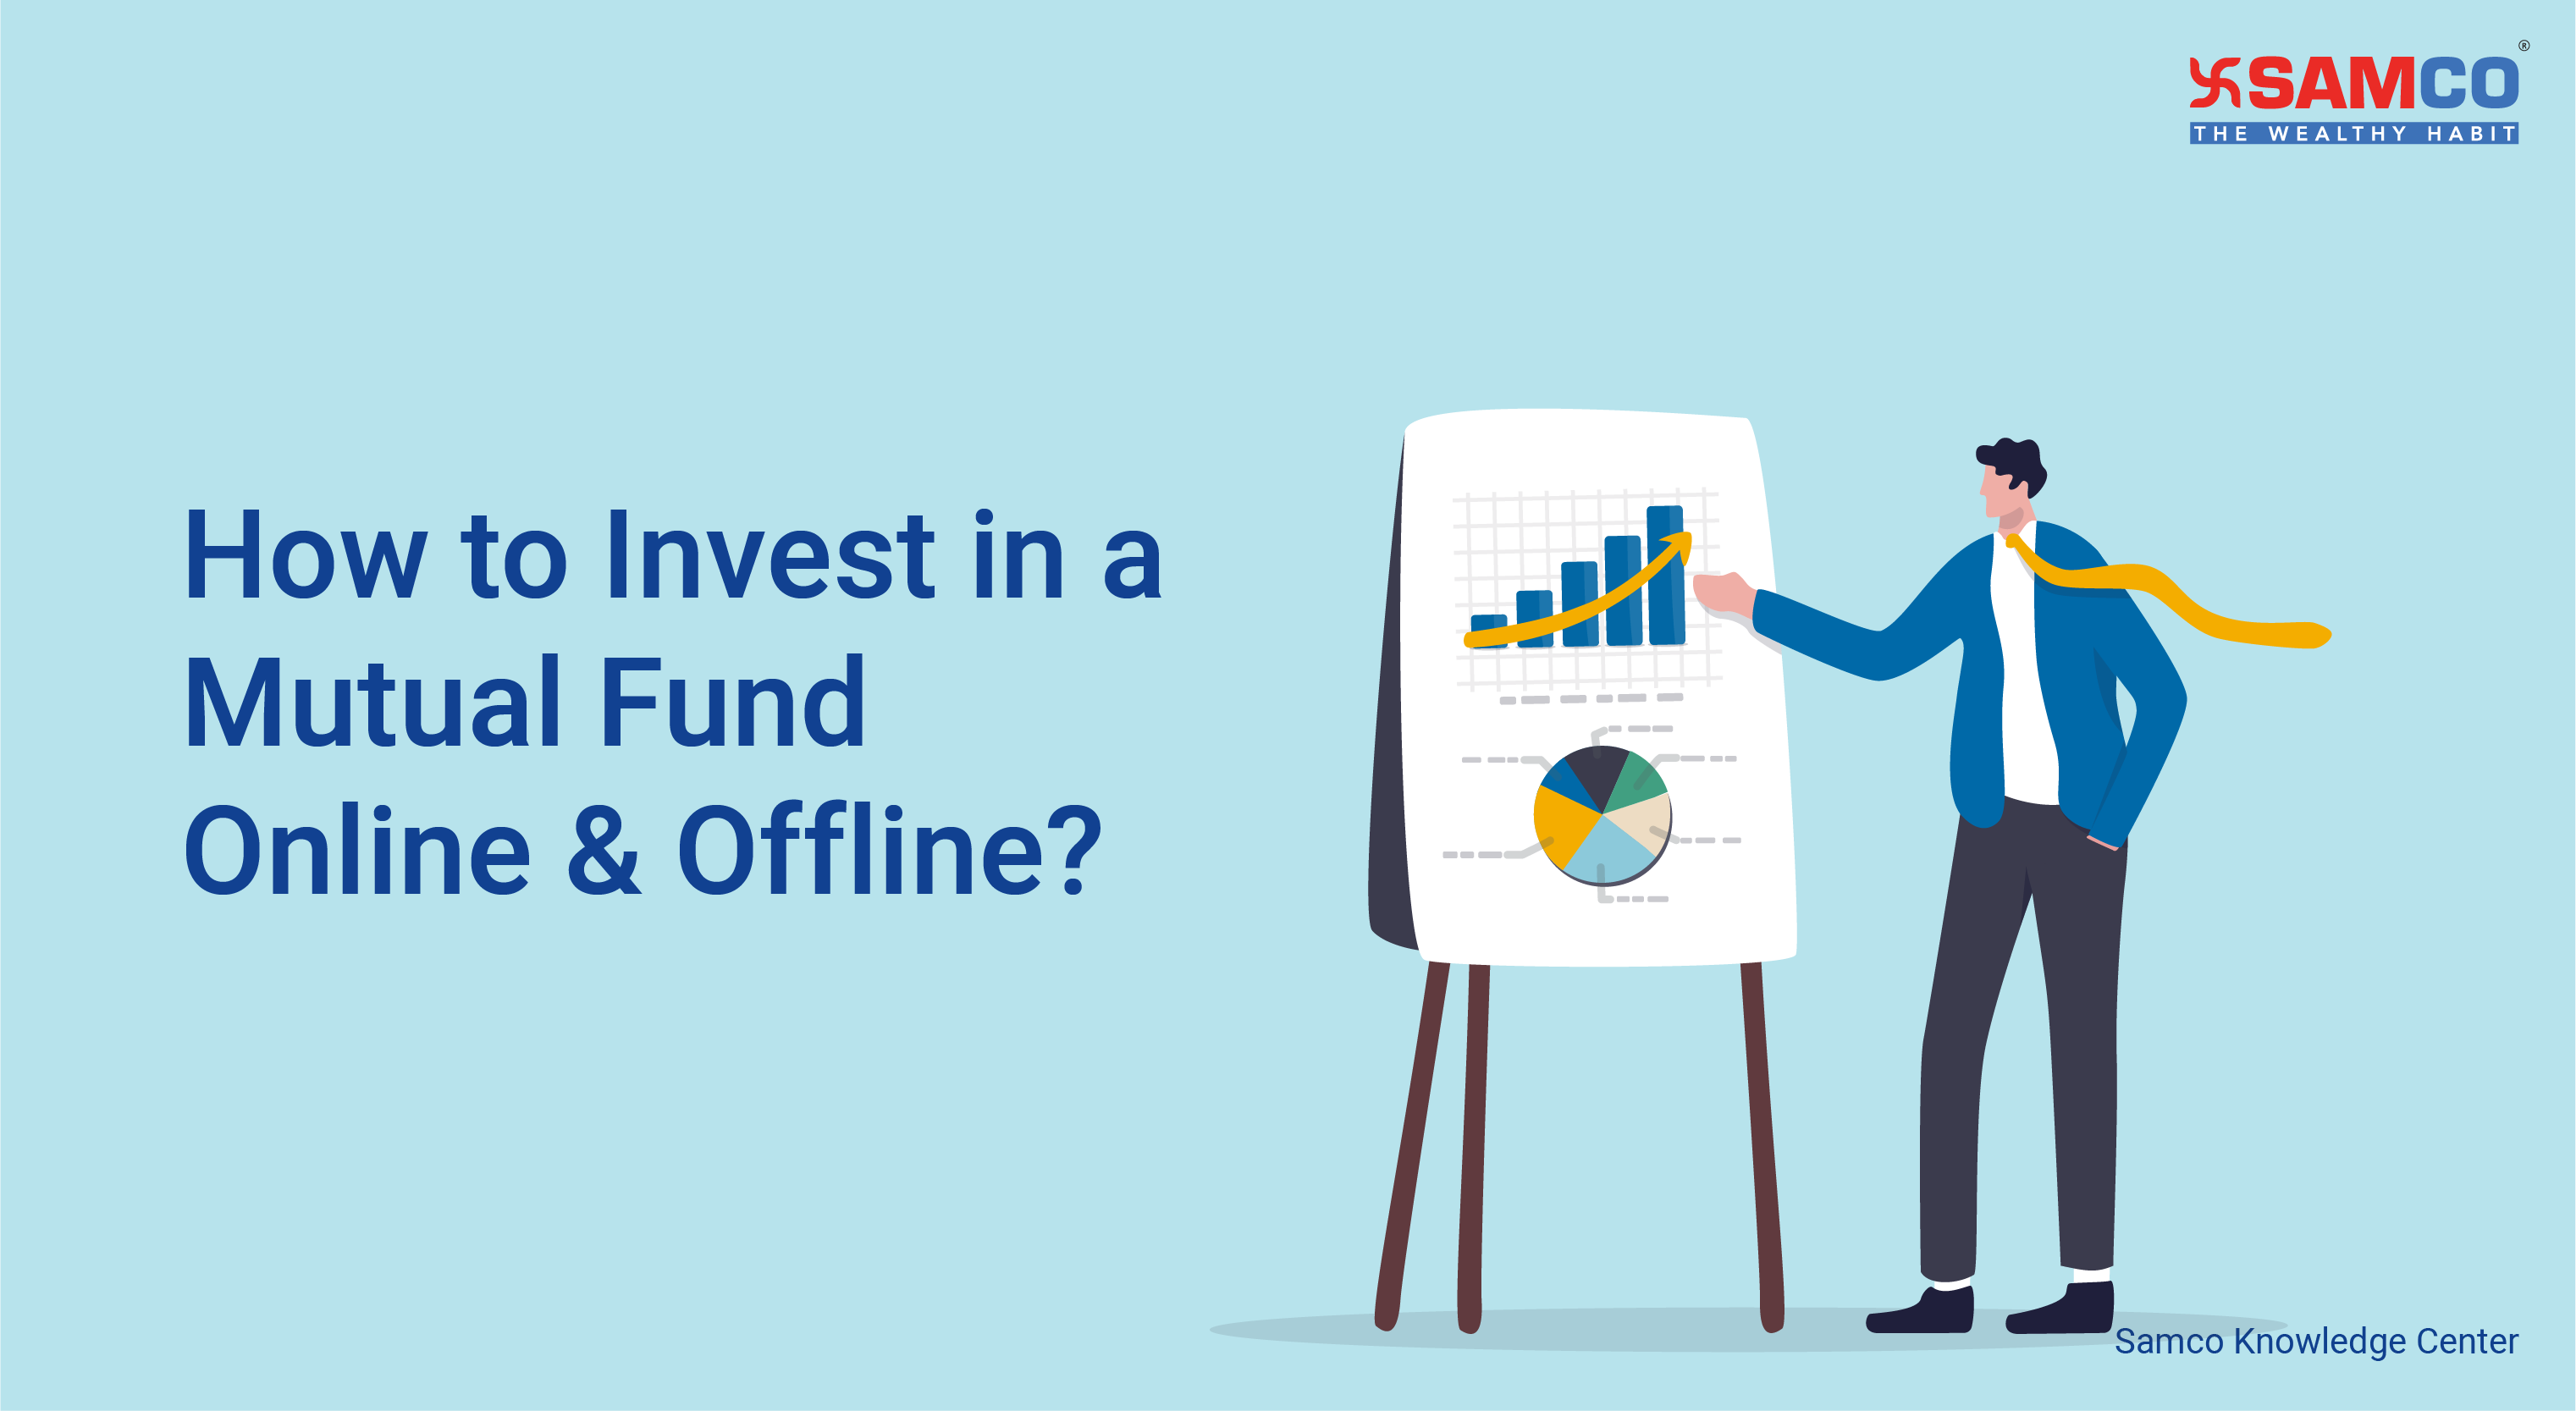 How to Invest in a Mutual Fund Online & Offline?